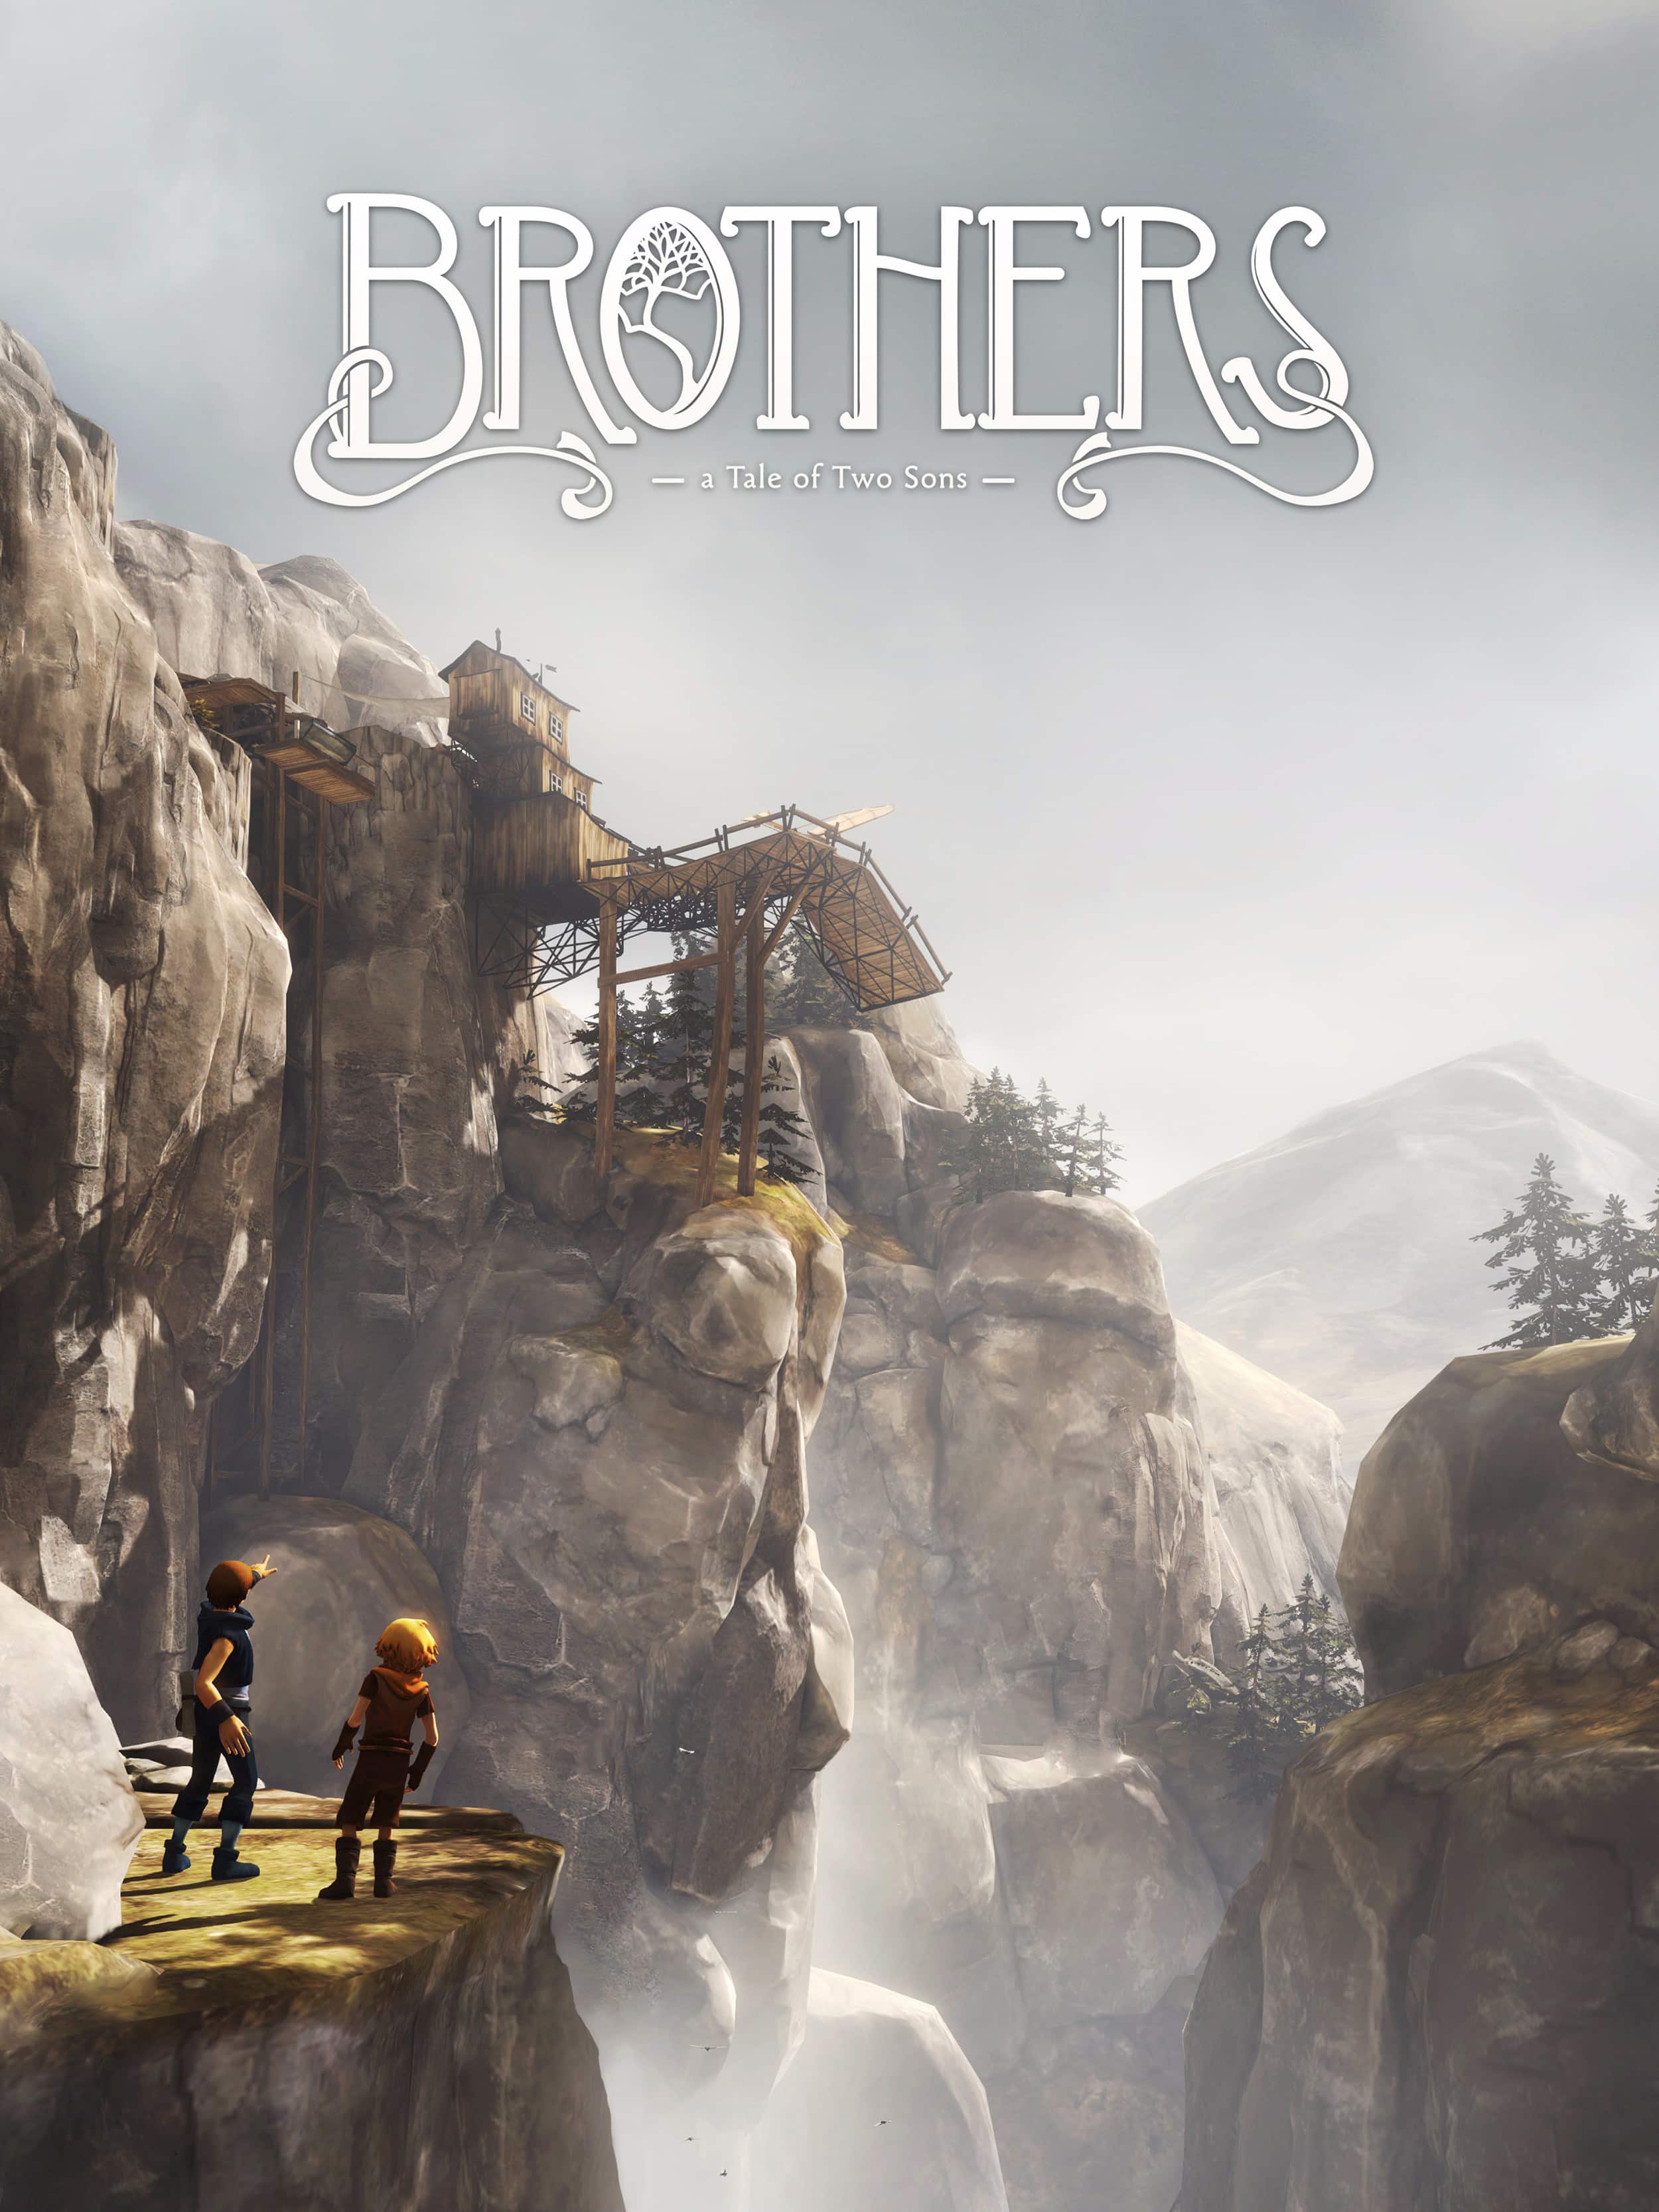 2 brothers game. Игра brothers a Tale of two sons. Brothers: a Tale of two sons обложка. Brothers Tale ps4. Brothers a Tale of two sons ps4.